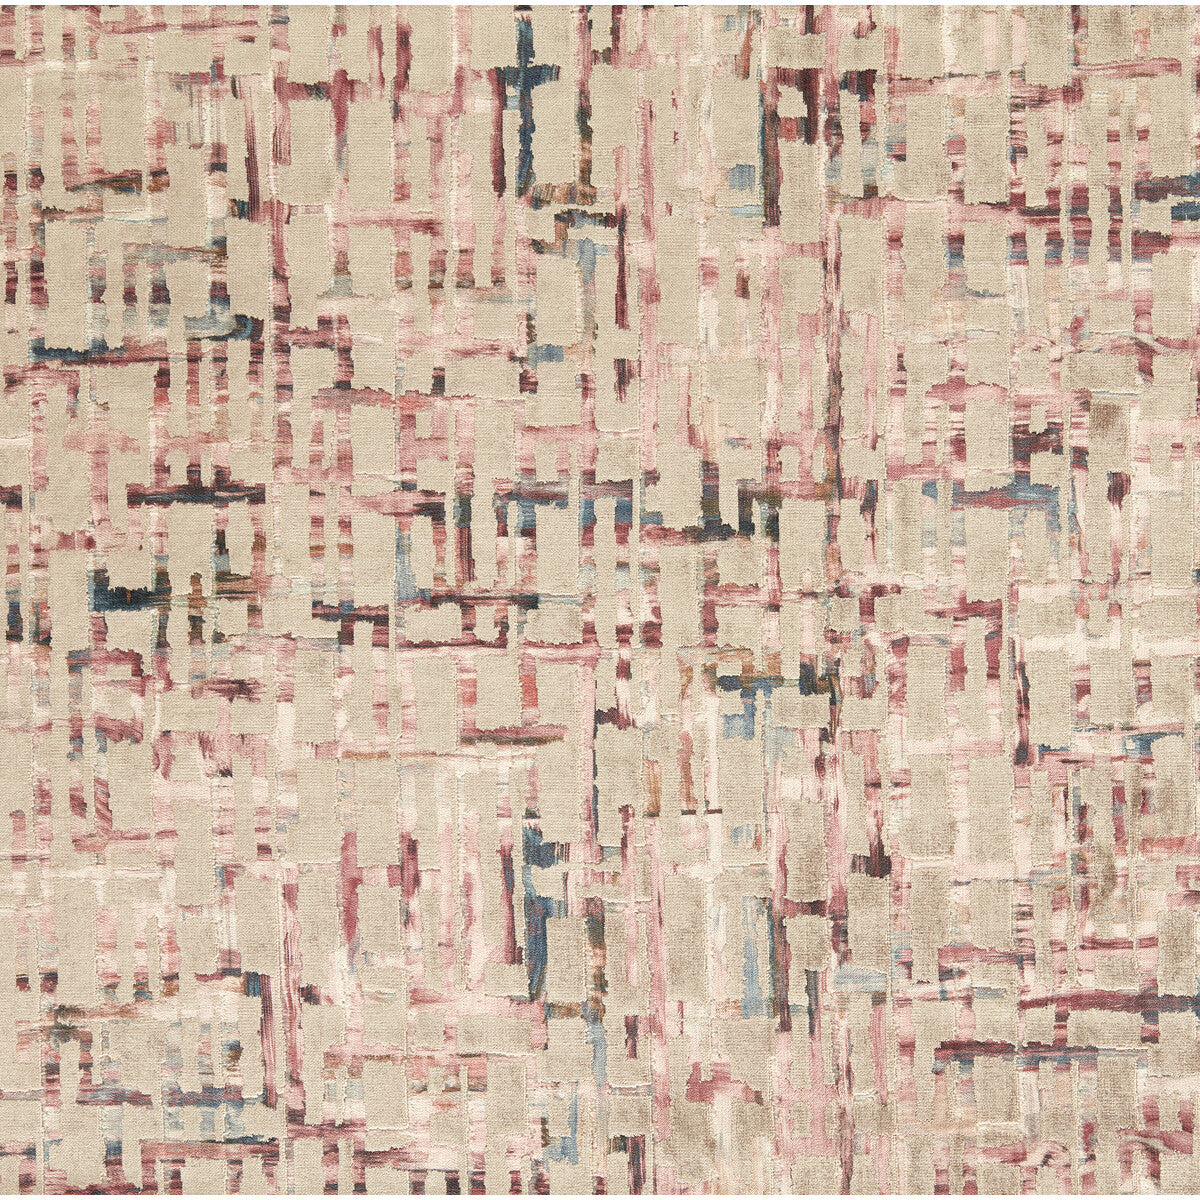 Quadrata fabric in blush/natural color - pattern F1697/01.CAC.0 - by Clarke And Clarke in the VIvido collection